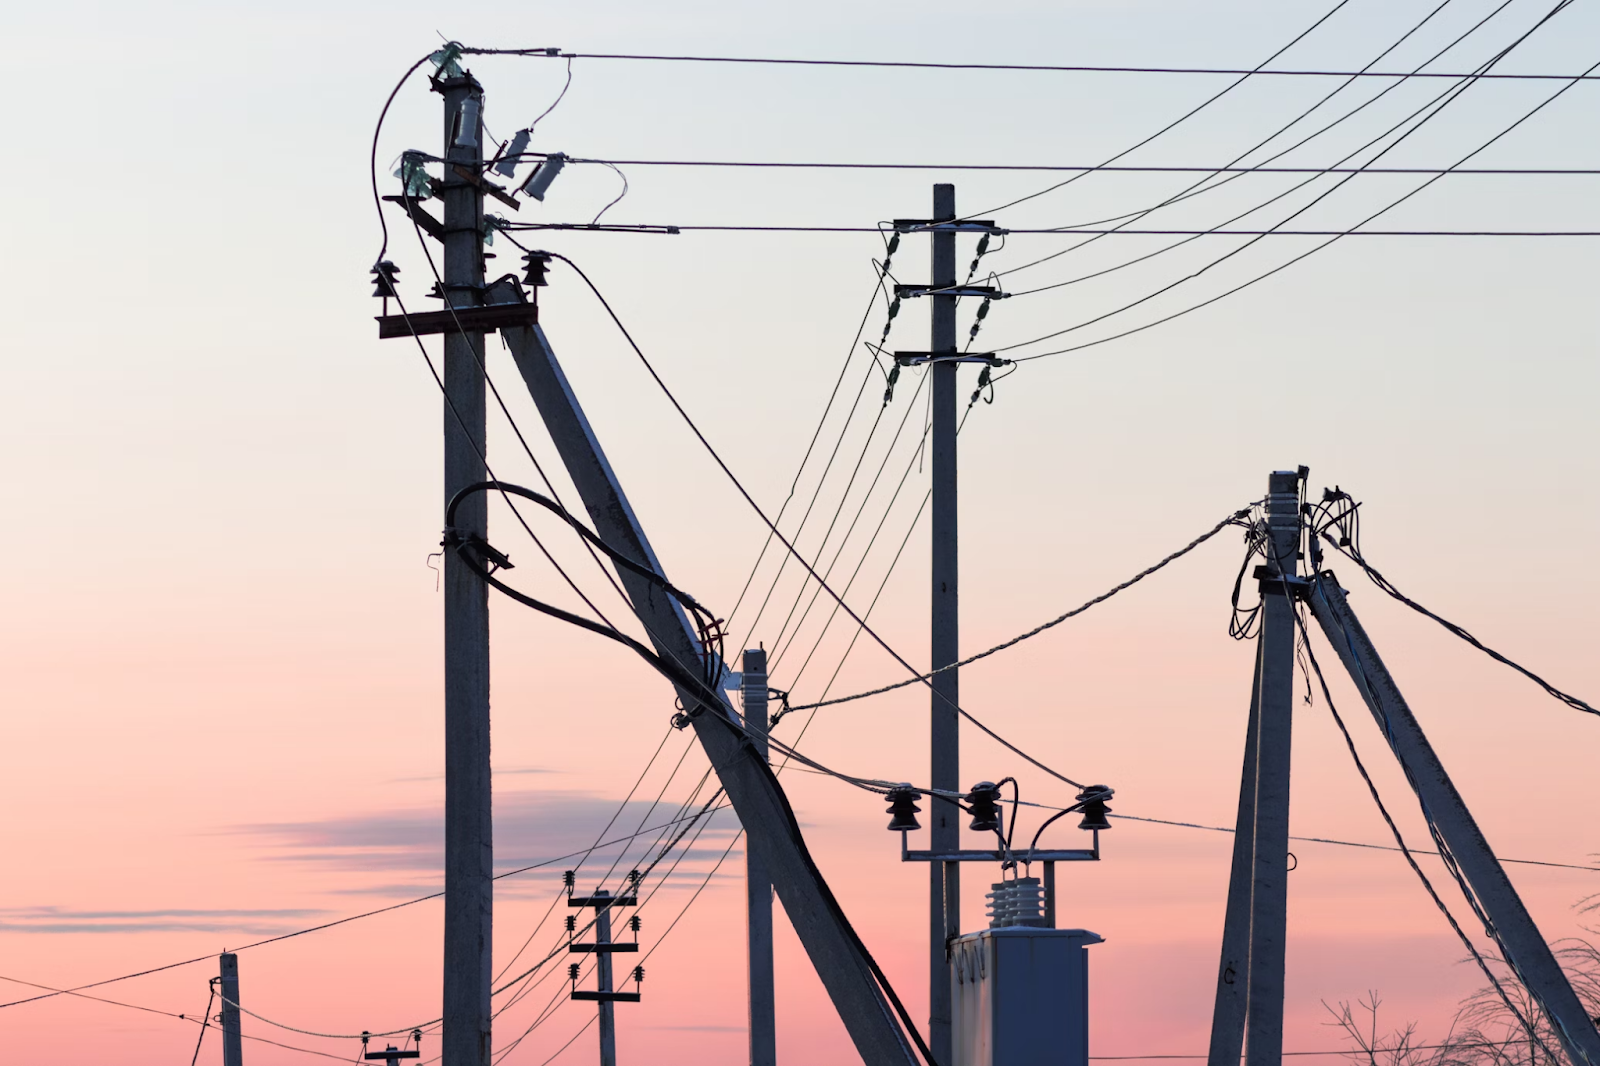 Electricity distribution lines are public utilities